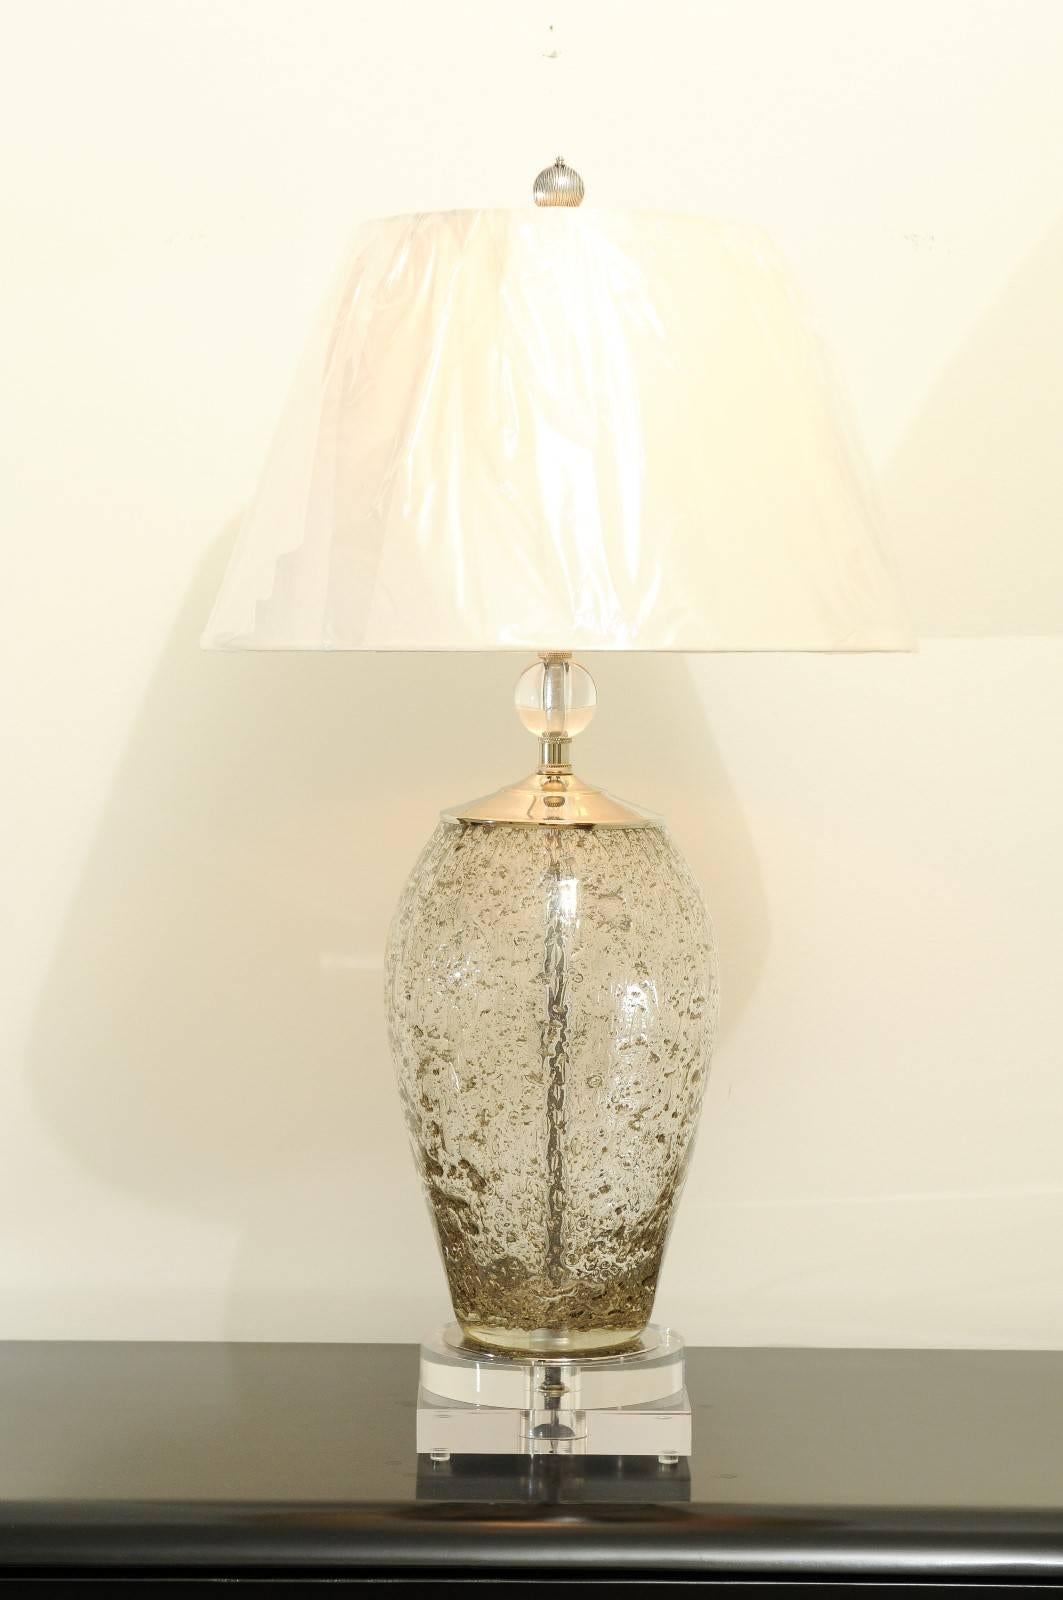 A stunning pair of Italian blown glass vessels, circa 1970, as newly built custom lamps. Fabulous, exceptionally made thick blown glass form. Built using components of only the finest quality. Exquisite jewelry! Excellent Restored Condition. The